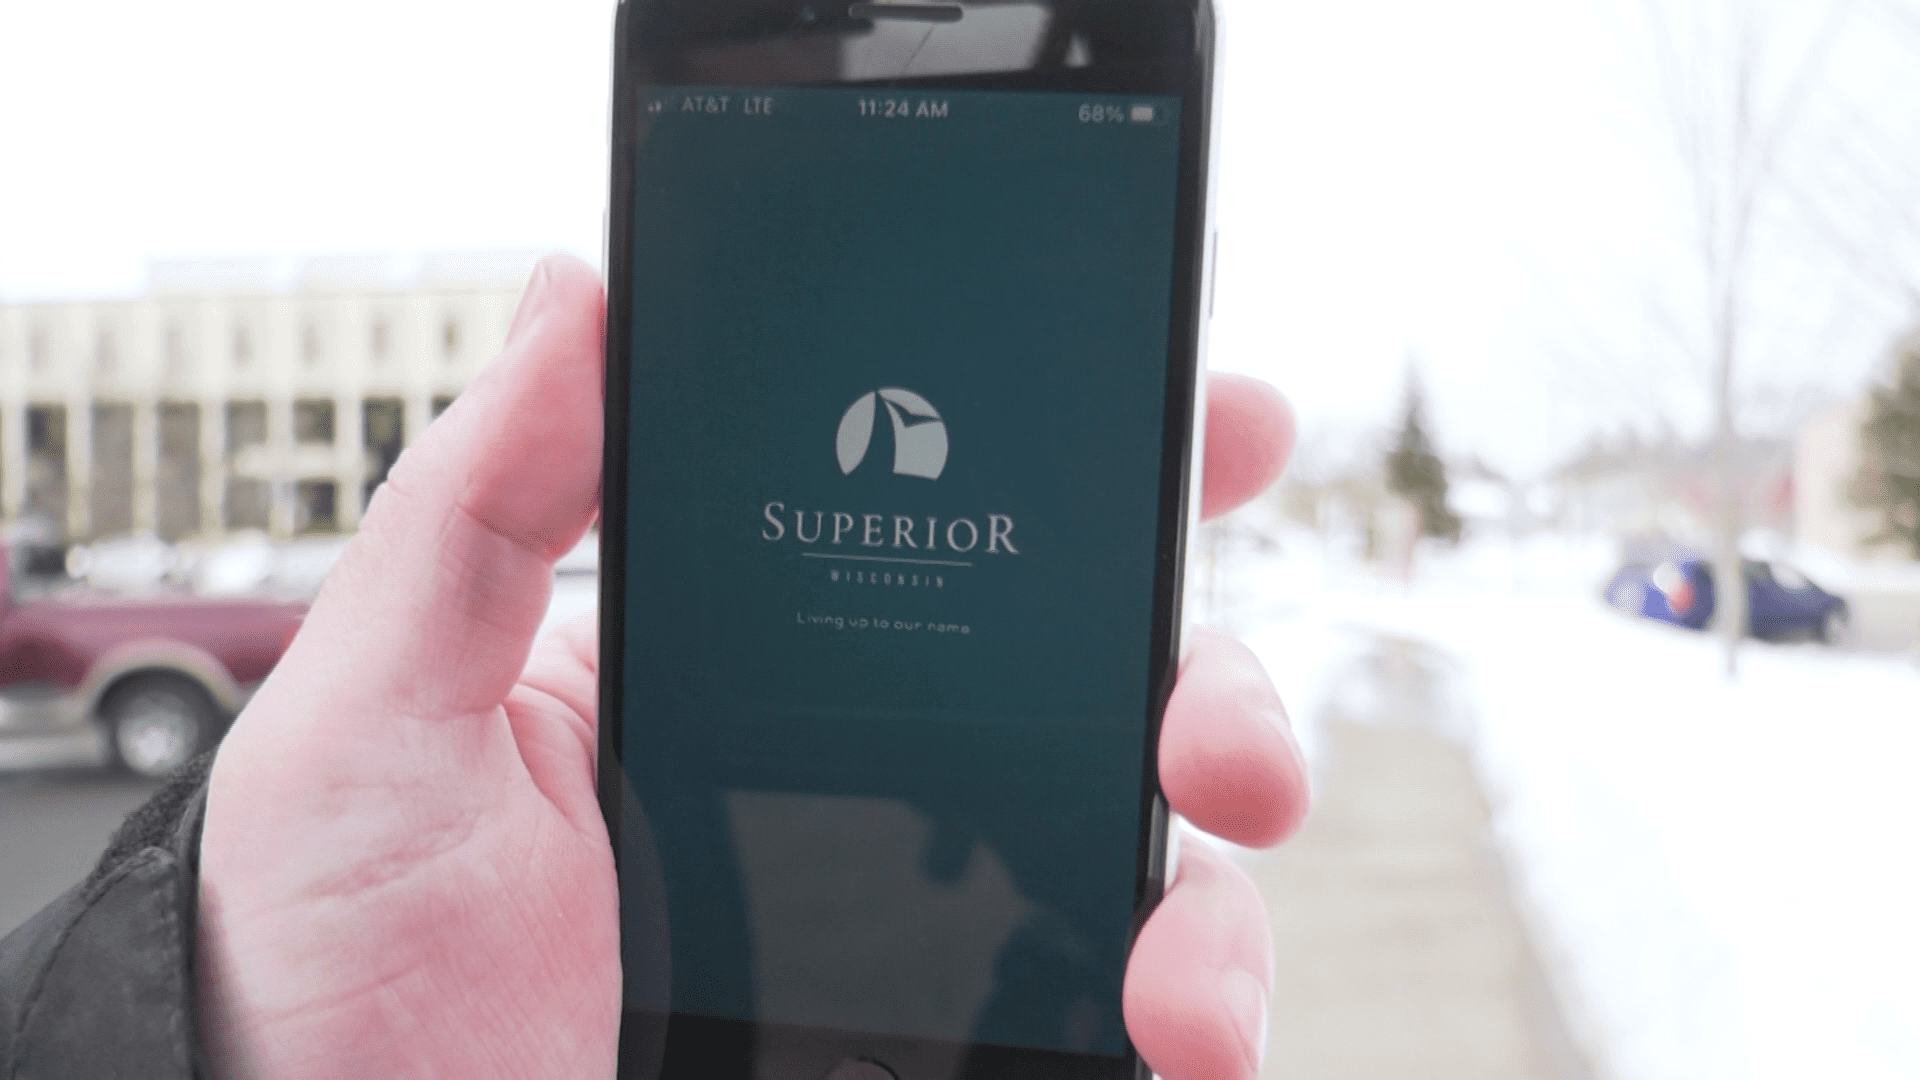 Mayor Jim Paine and the City of Superior are releasing a new smartphone app